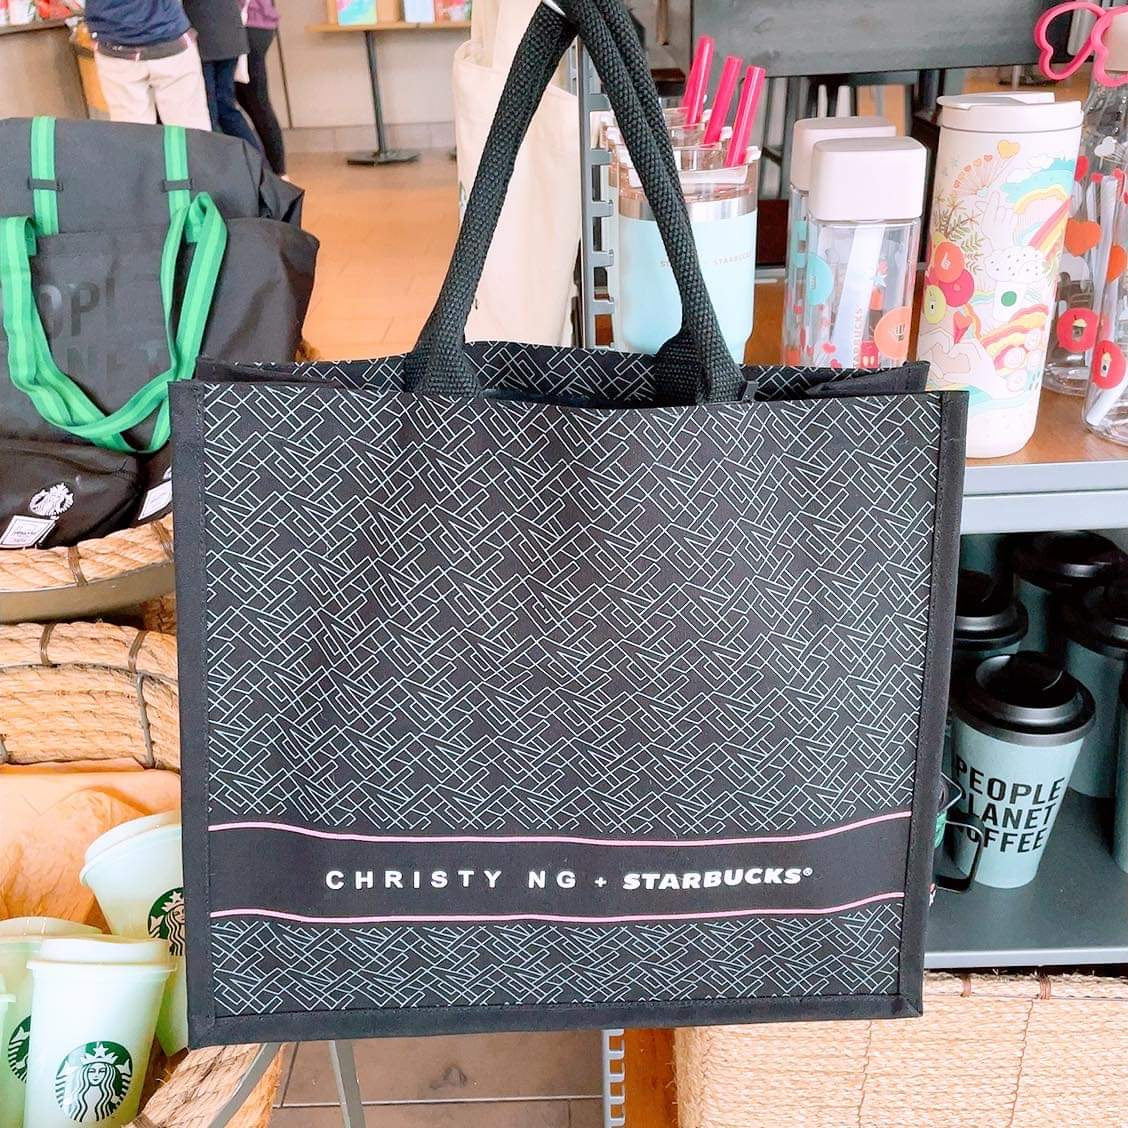 Christy Ng x Starbucks Small Tote - Malaysia Exclusive – Starbies Rules  Everything